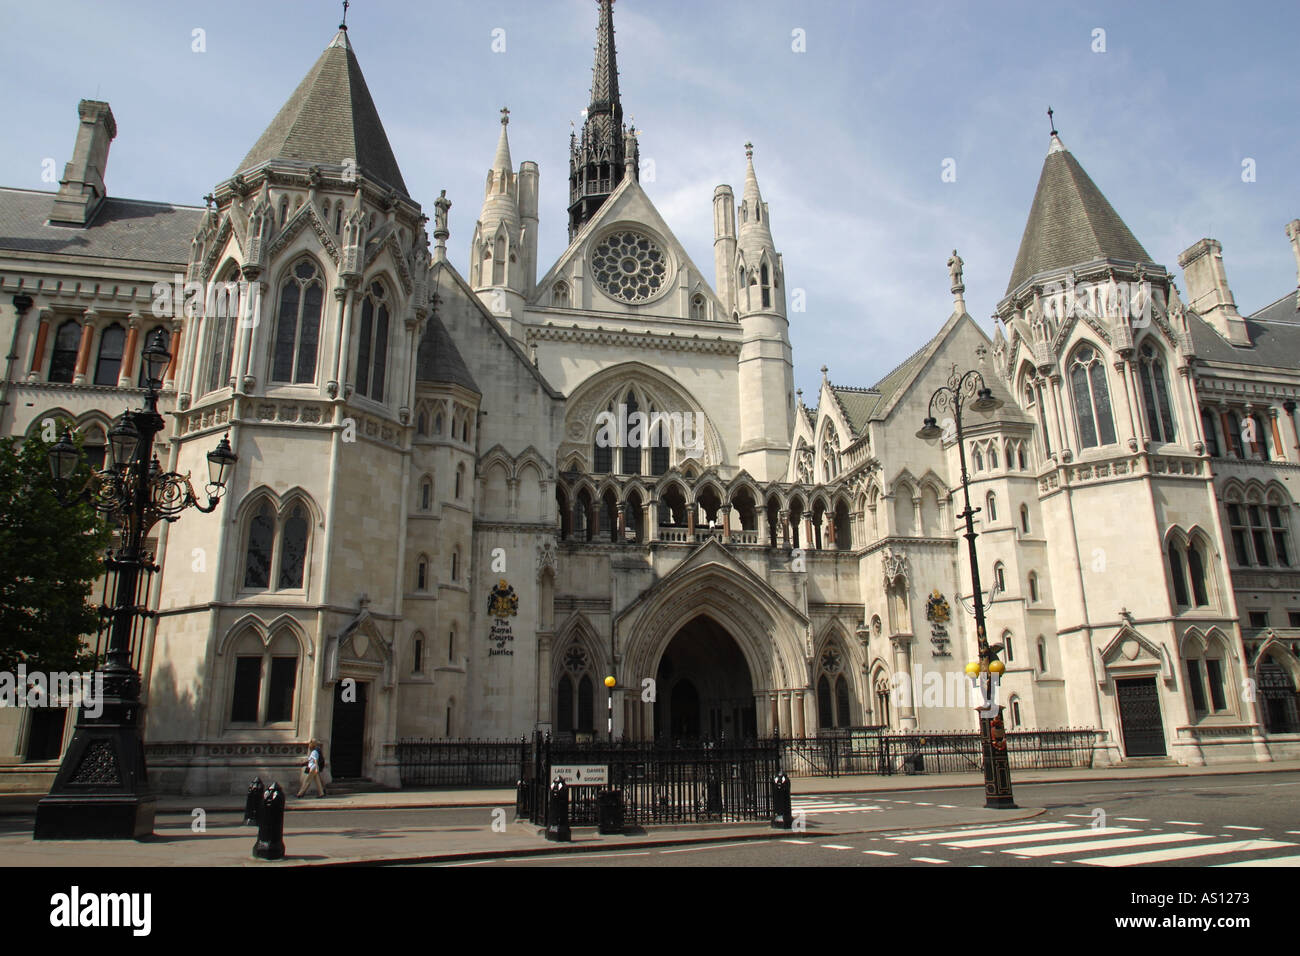 Royal Courts of Justice London England UK Stock Photo